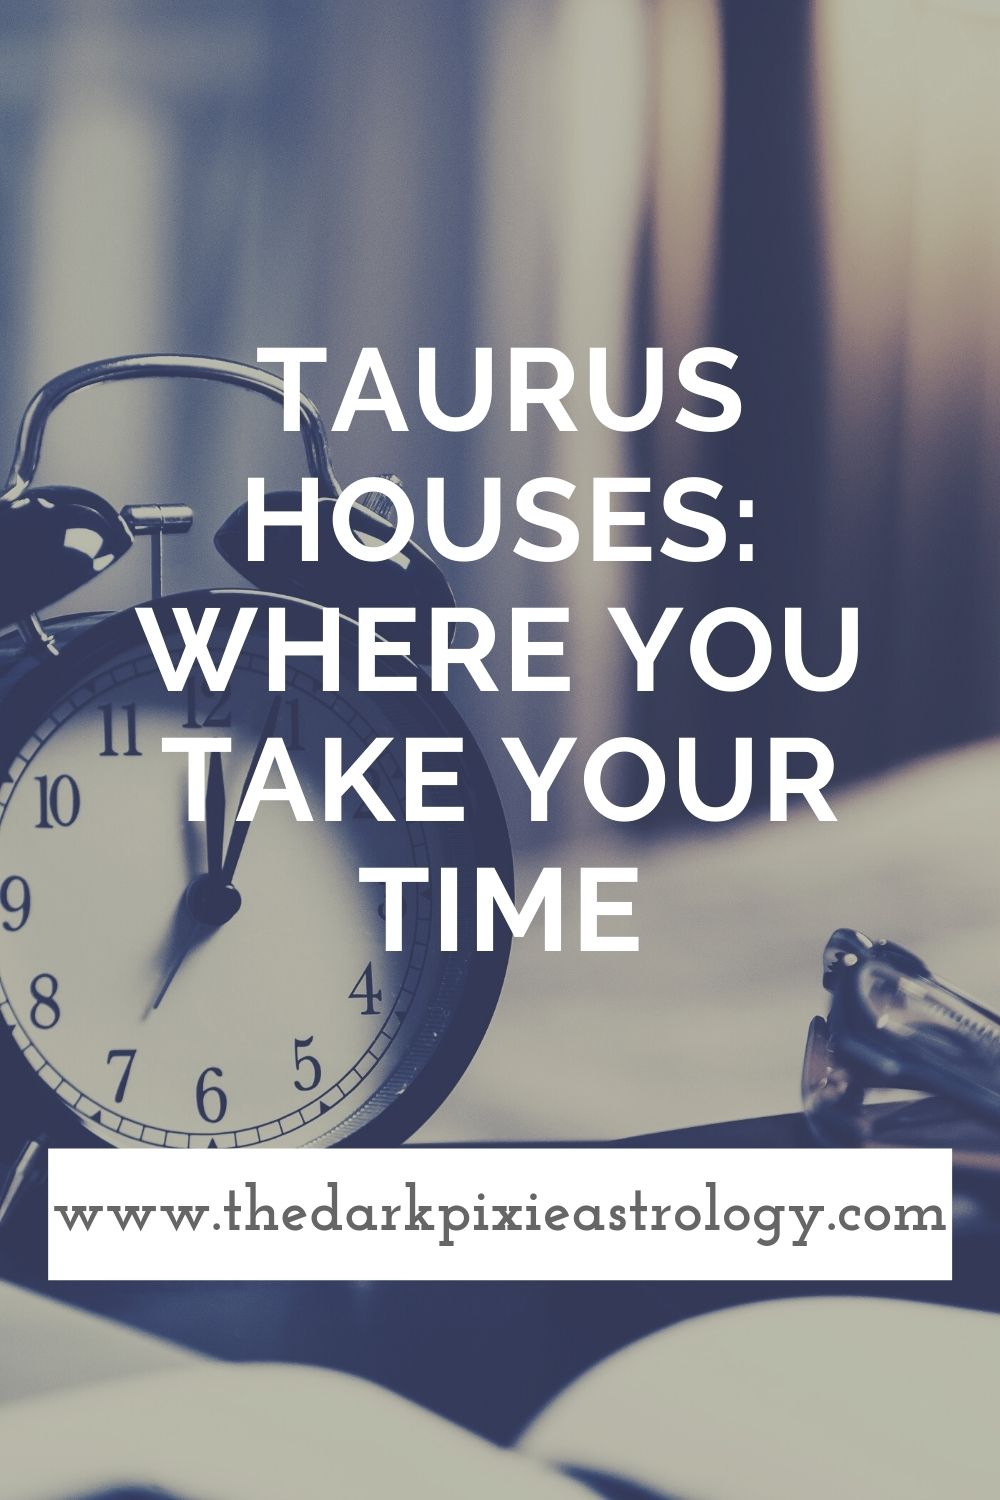 Taurus Houses: Where You Take Your Time - The Dark Pixie Astrology